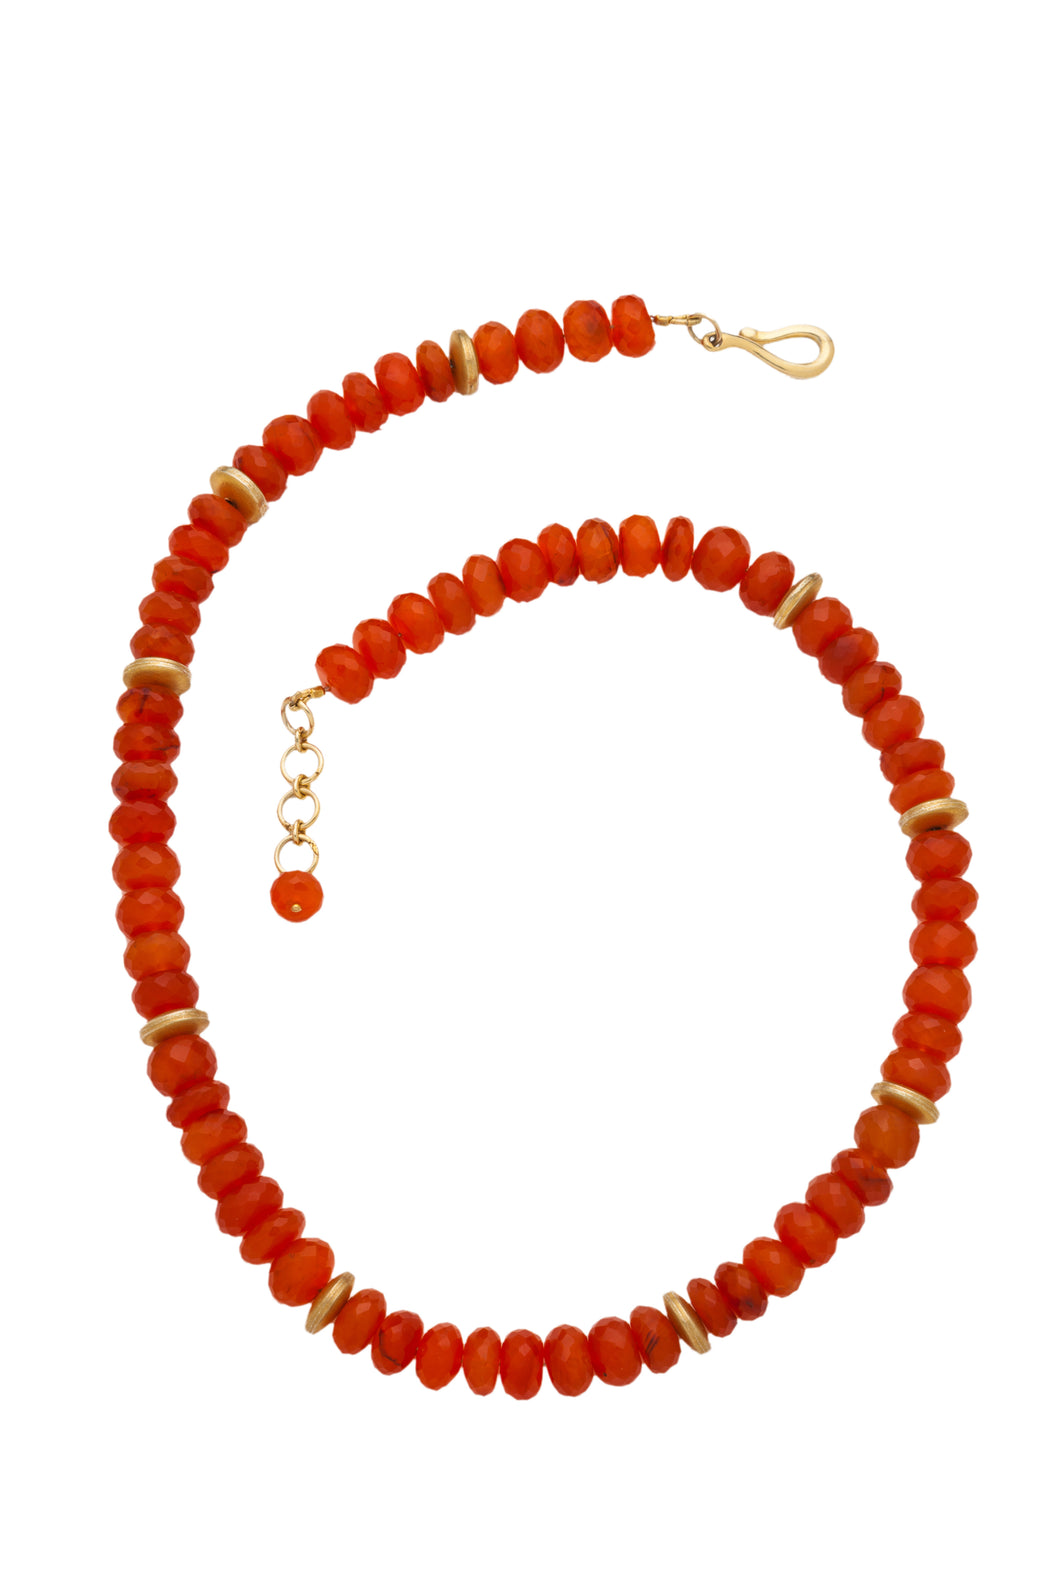 Bright red Carnelian chunky necklace in 24kt gold vermeil N006-C